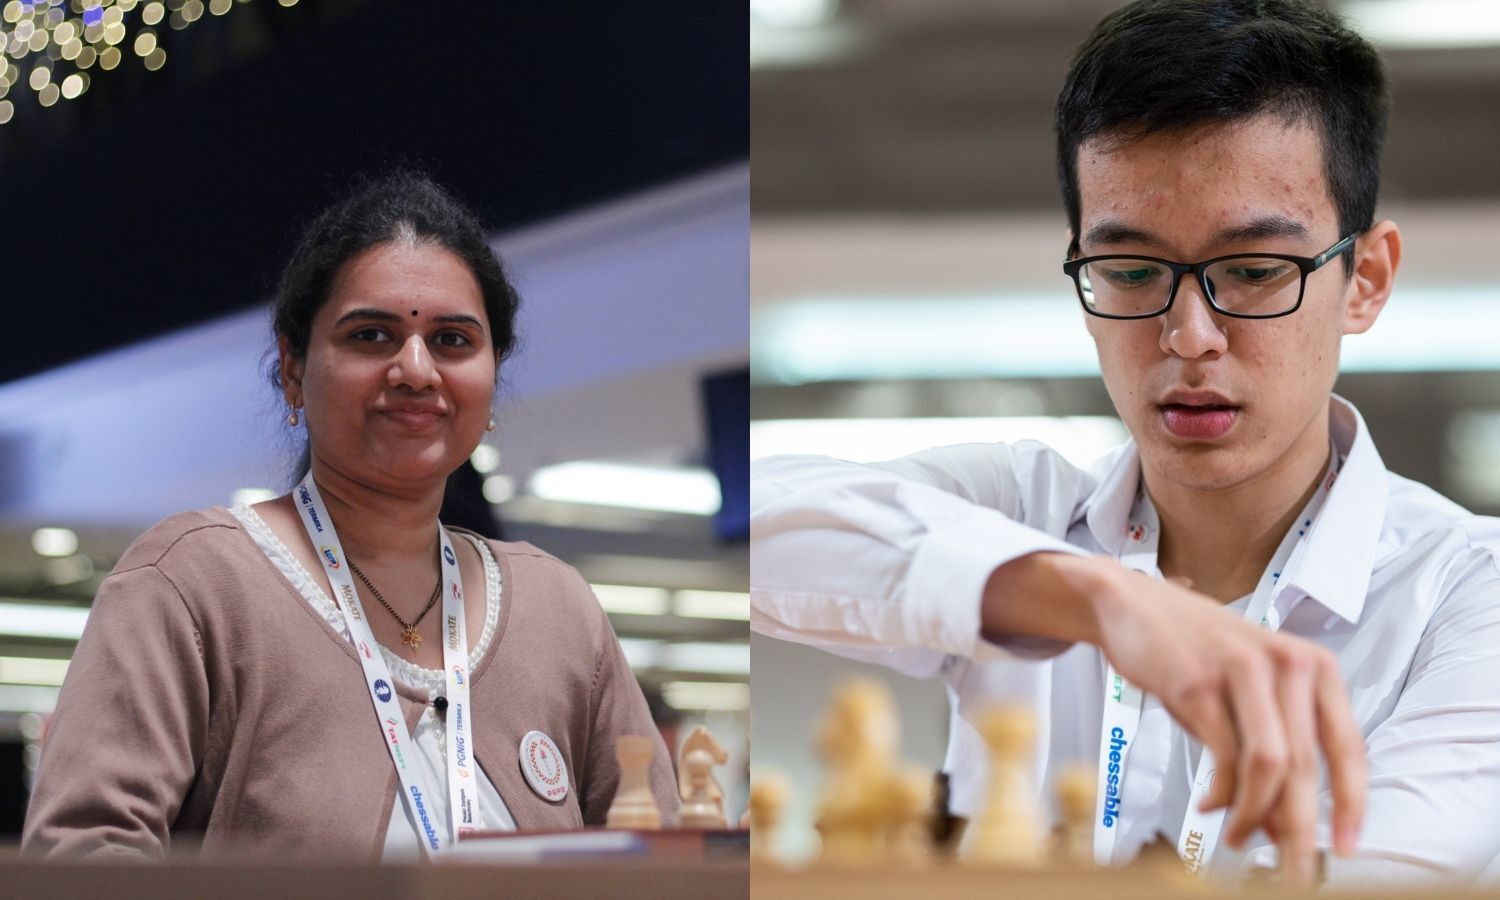 GM Koneru Humpy moves up to No. 2 position in world chess rankings